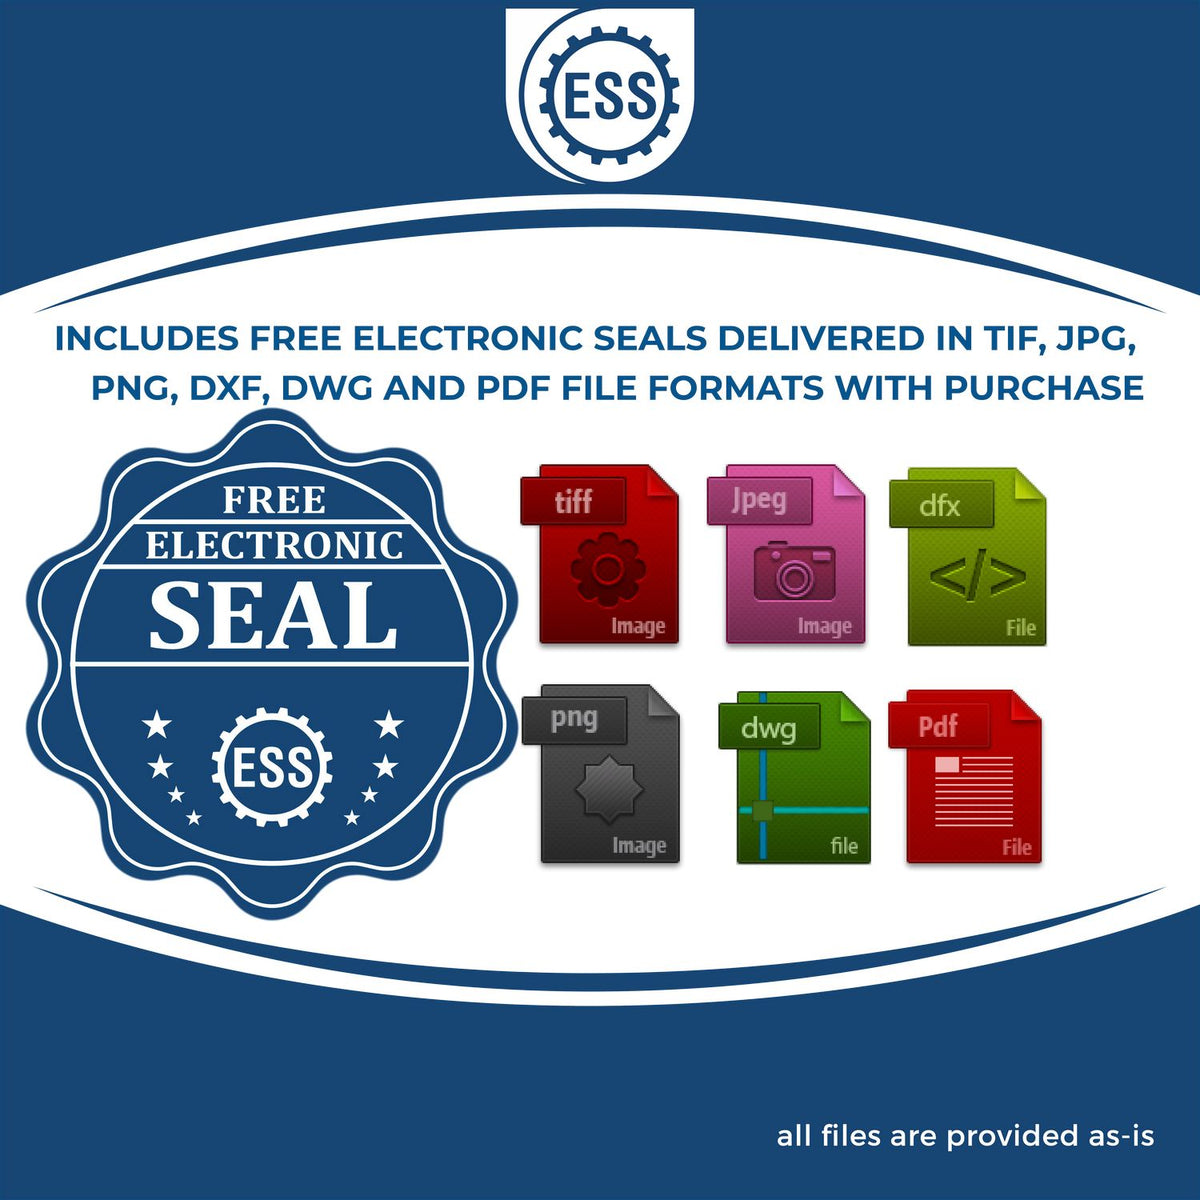 An infographic for the free electronic seal for the Slim Pre-Inked North Dakota Professional Geologist Seal Stamp illustrating the different file type icons such as DXF, DWG, TIF, JPG and PNG.